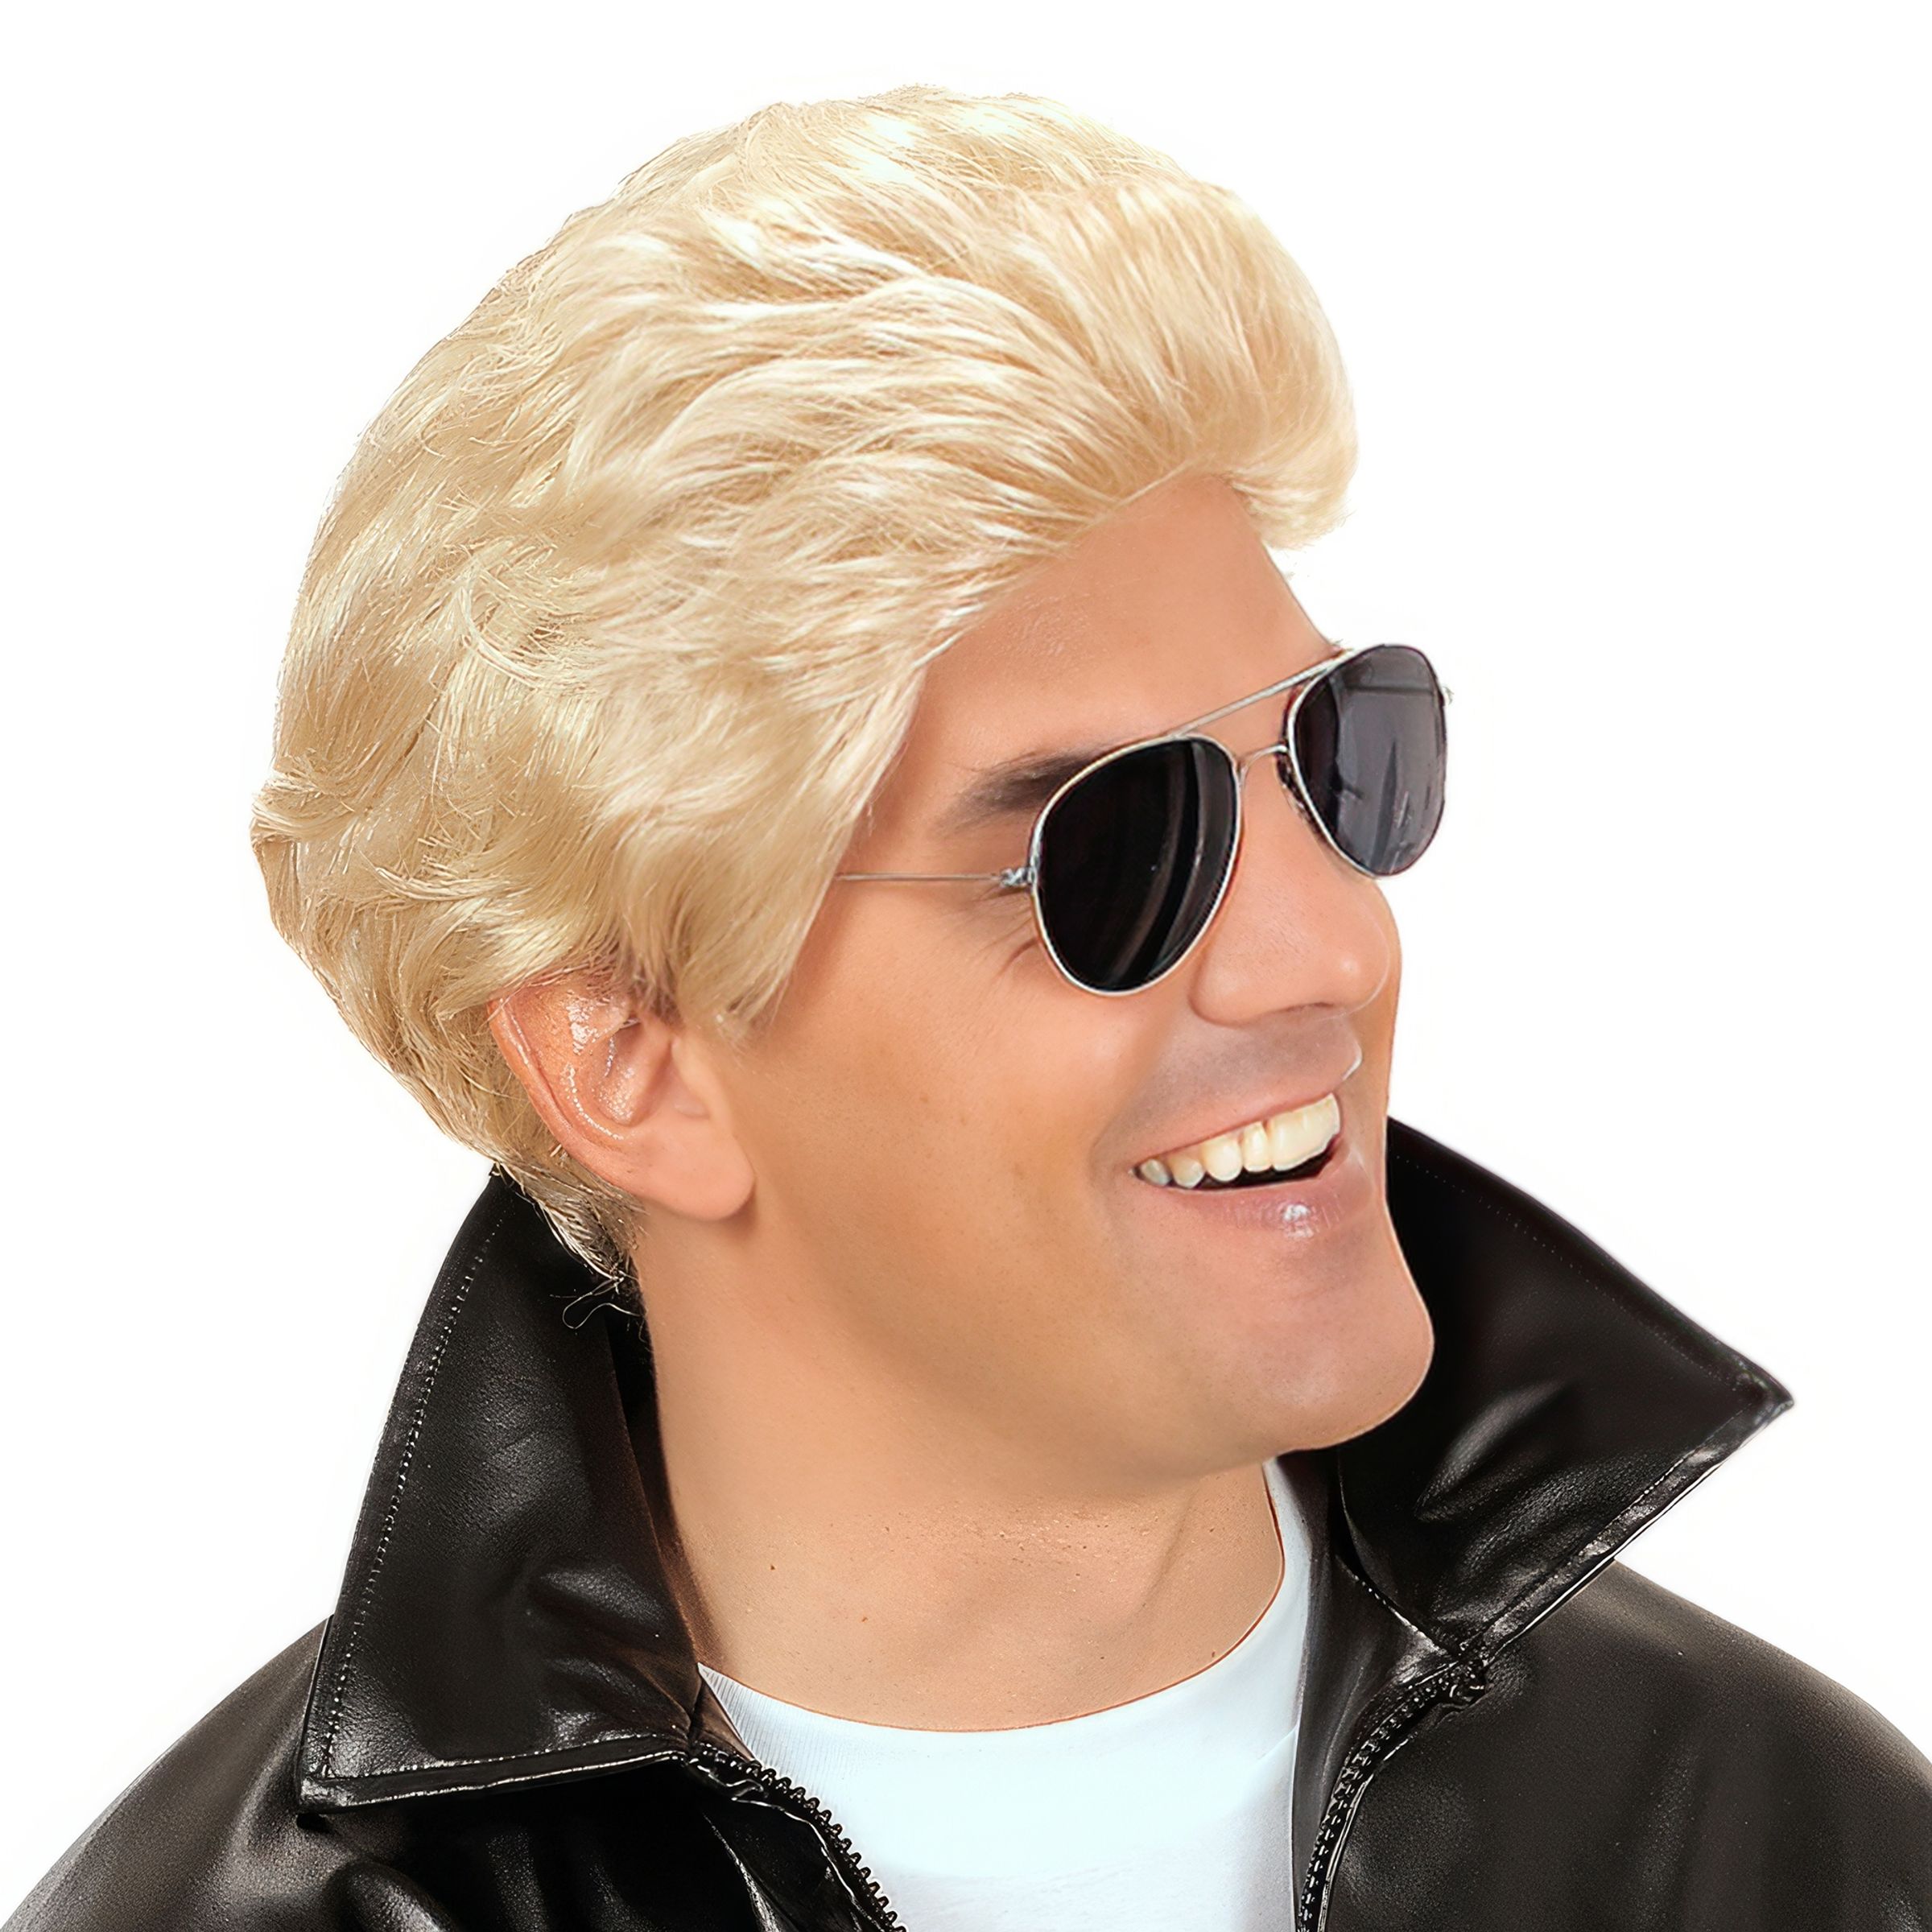 Grease Blond Peruk - One size